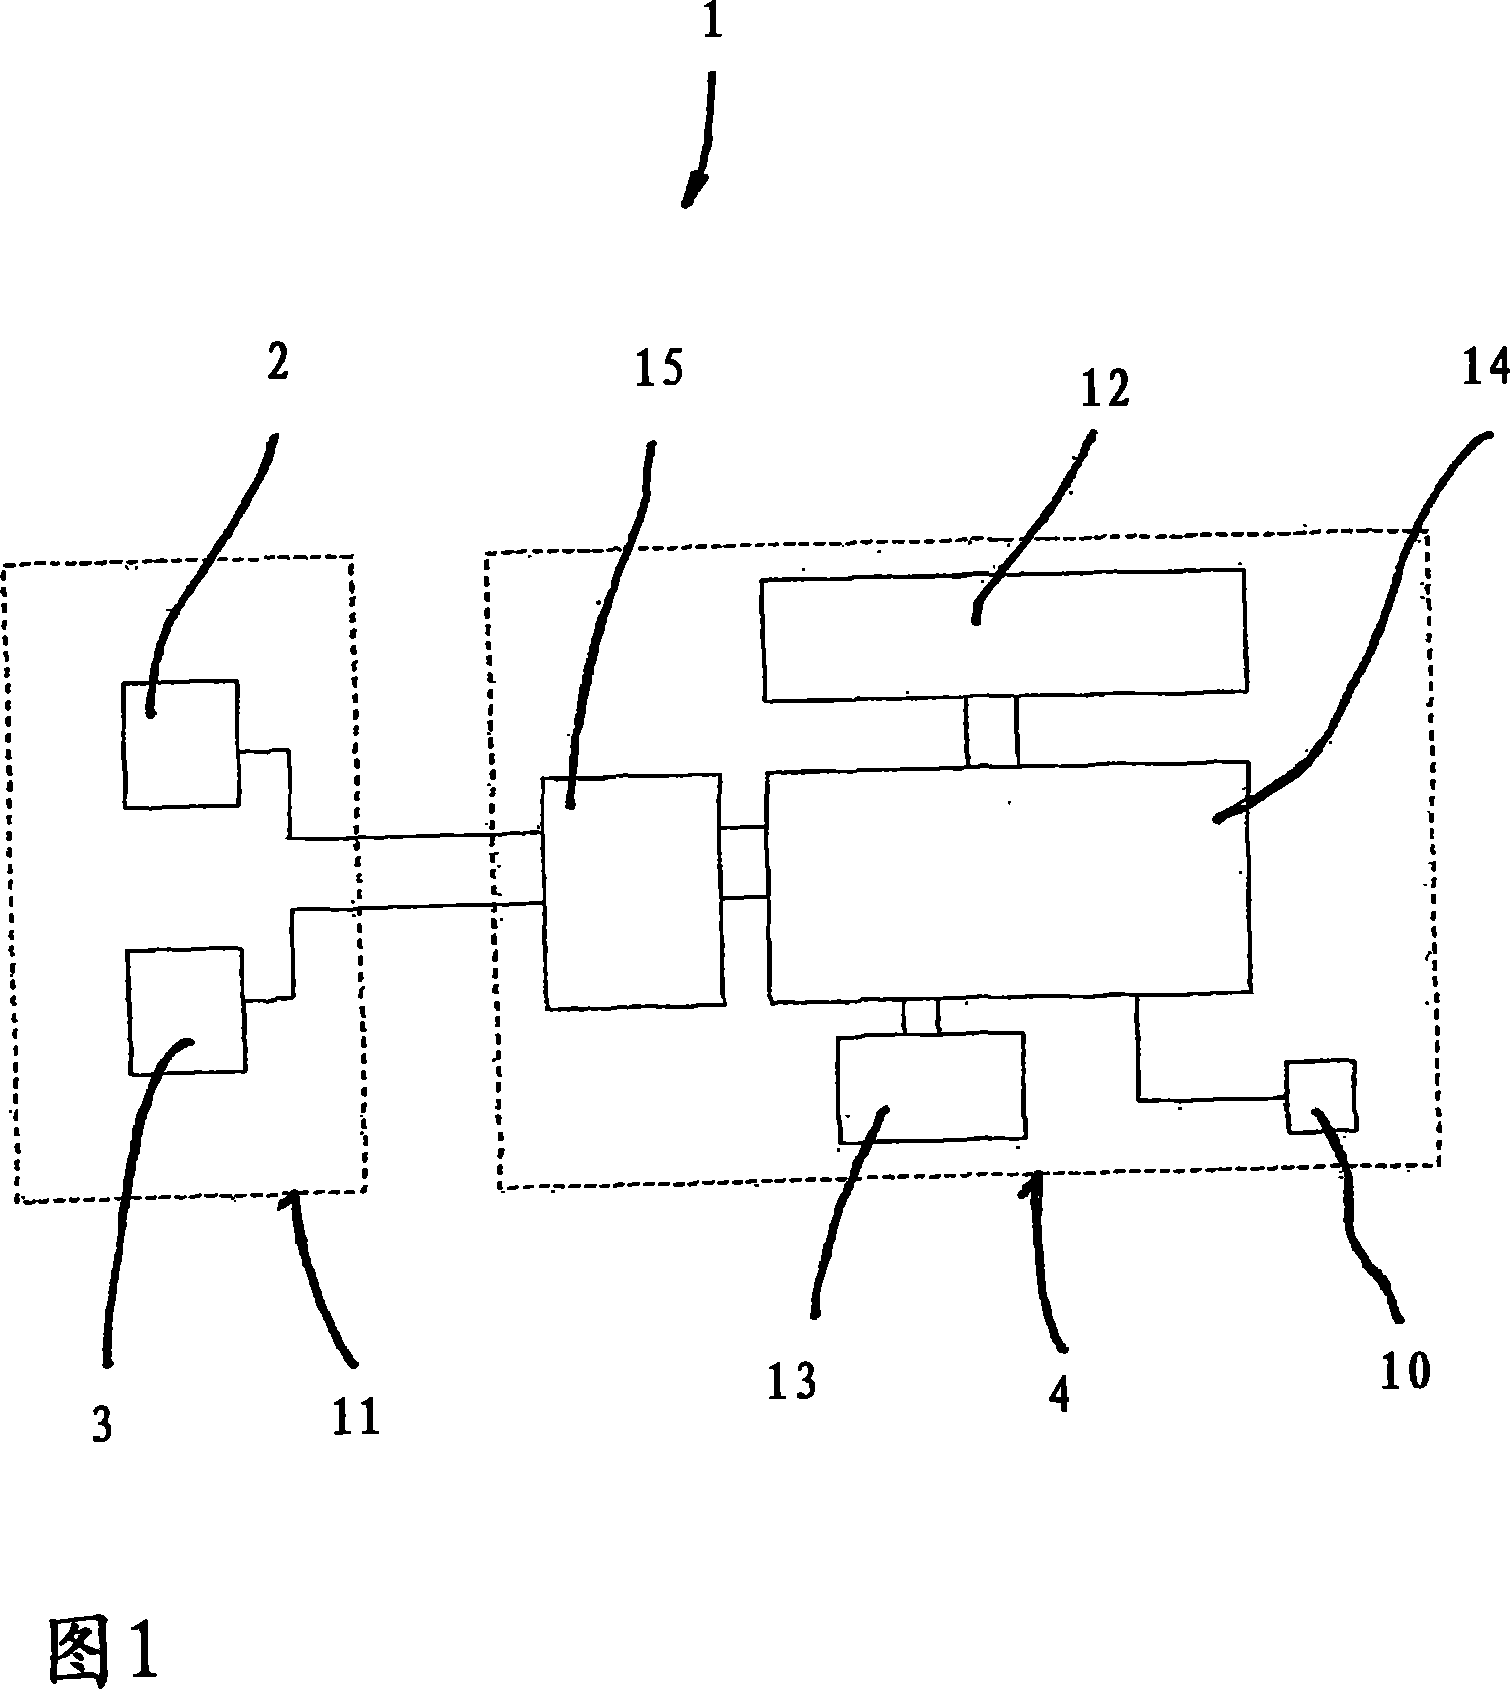 Device for the transdermal stimulation of a nerve of the human body